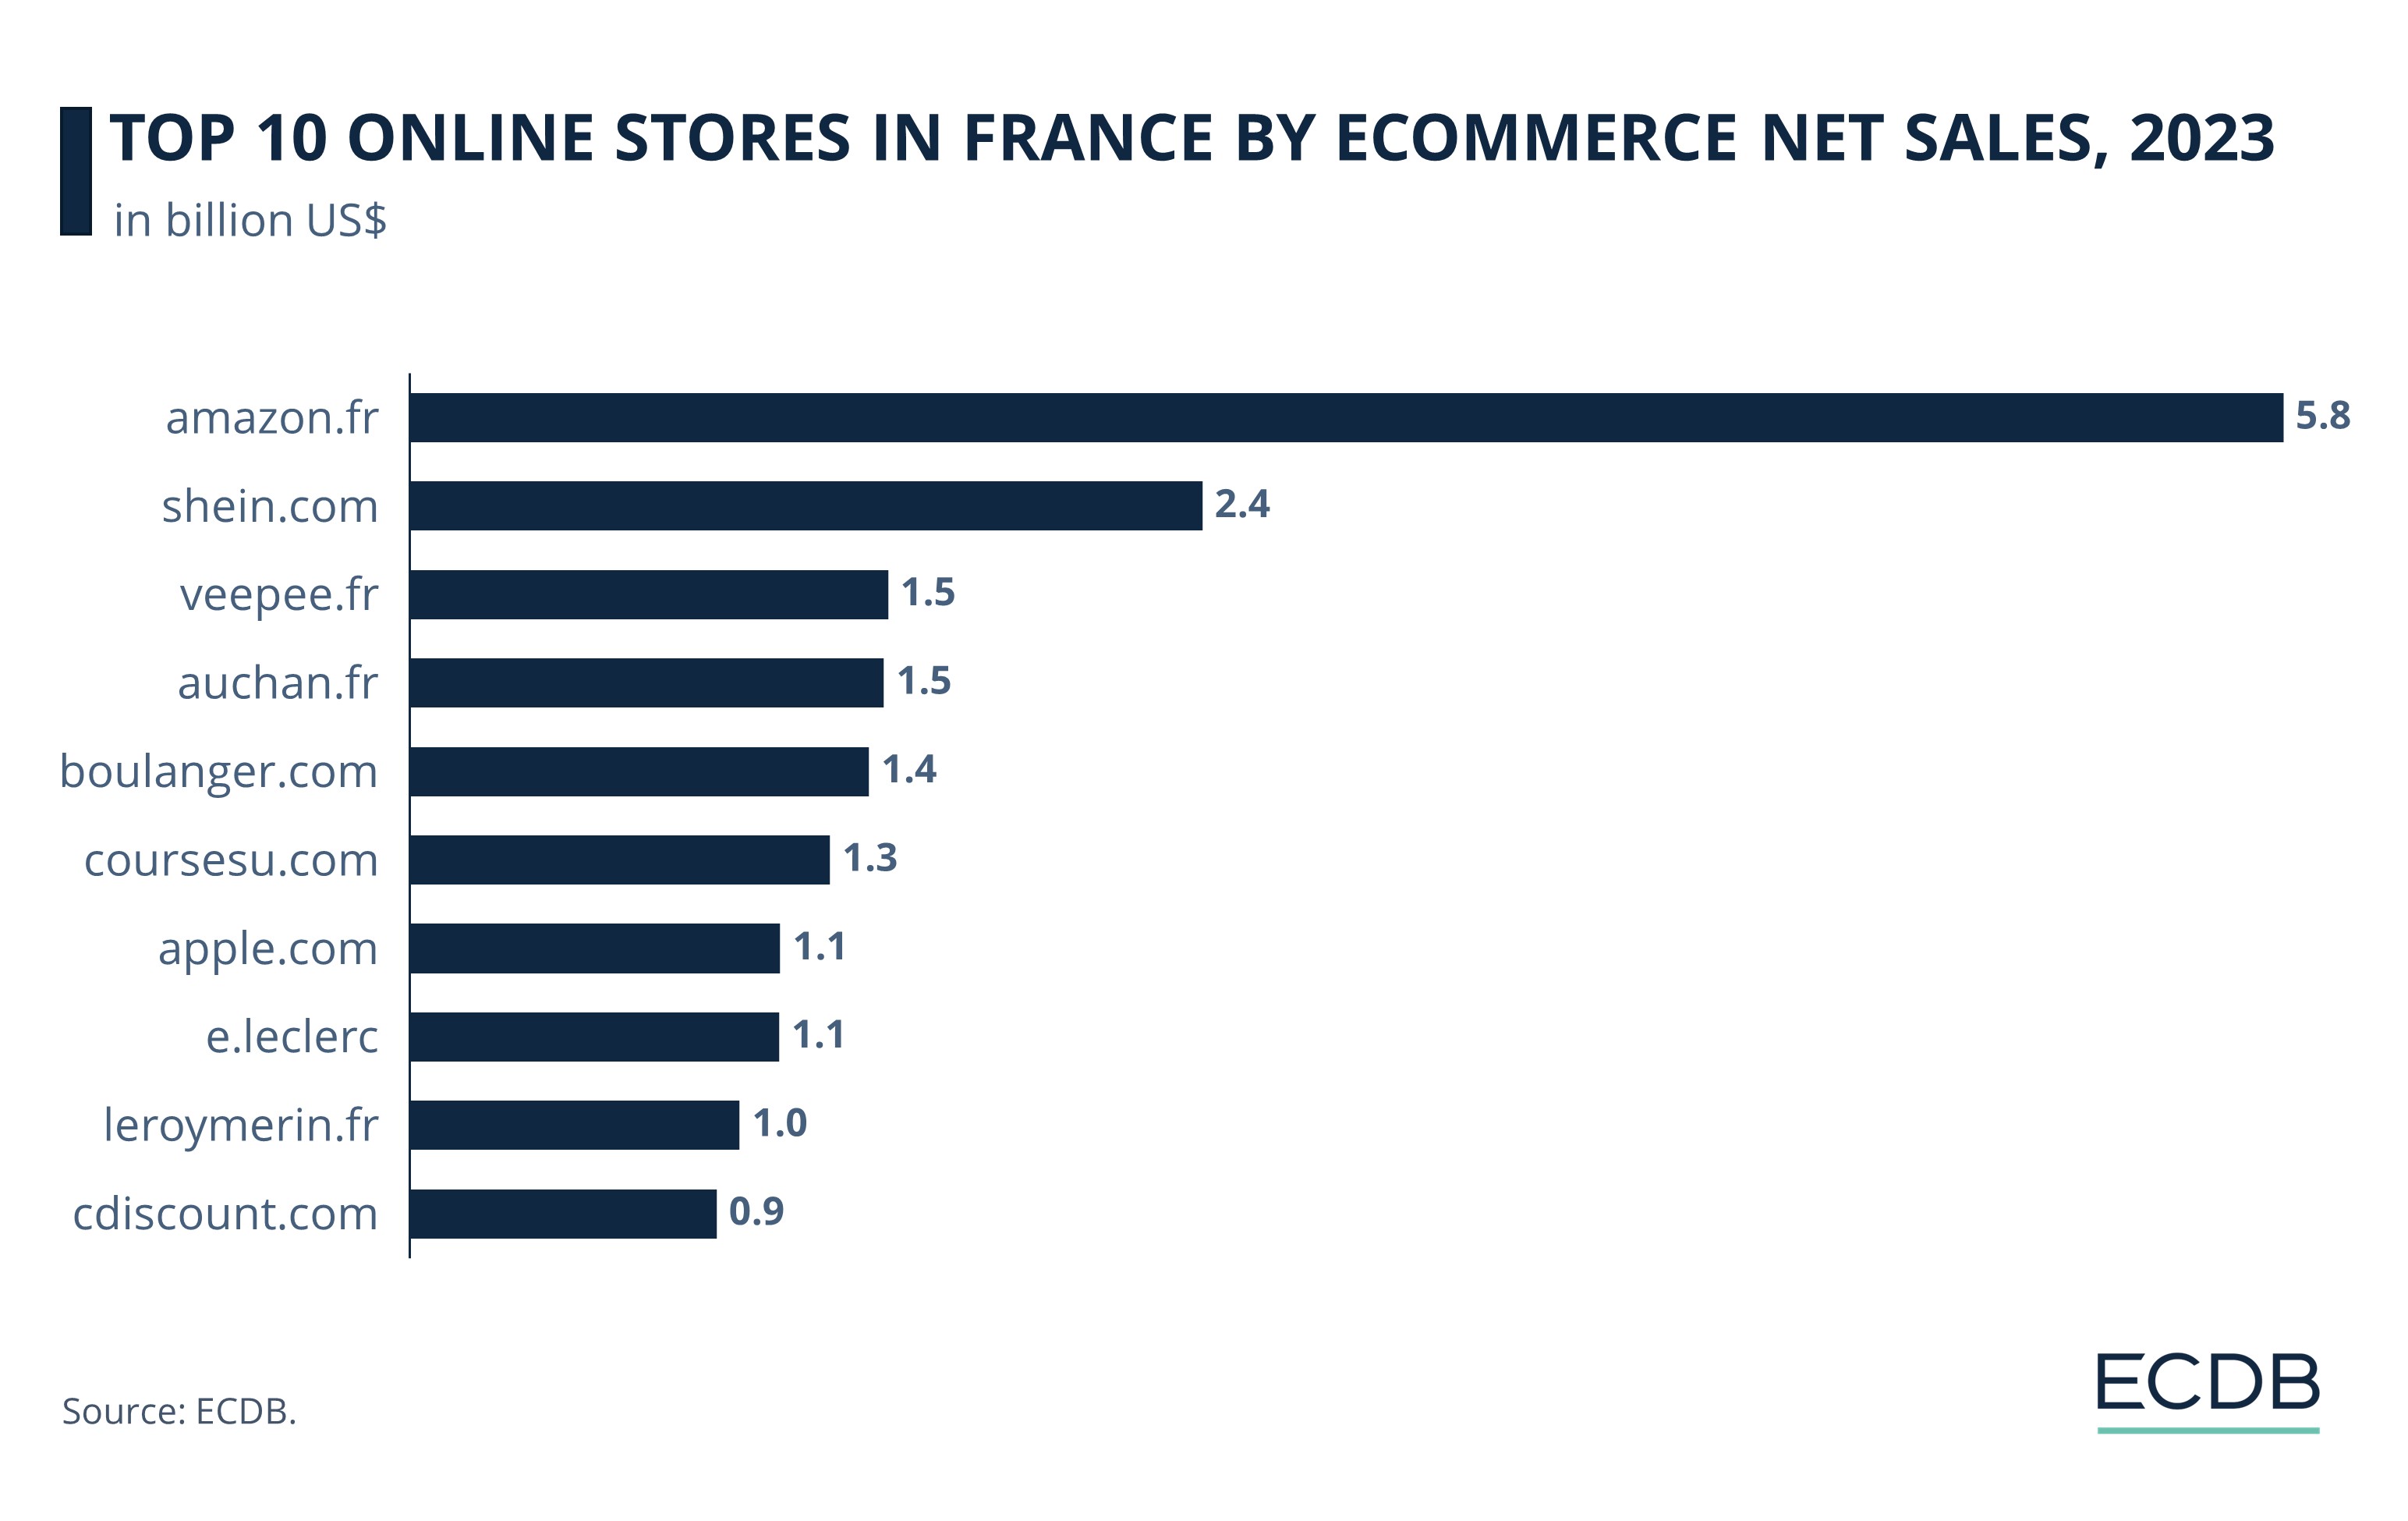 Top 10 Online Stores in France by eCommerce Net Sales, 2023 (2)